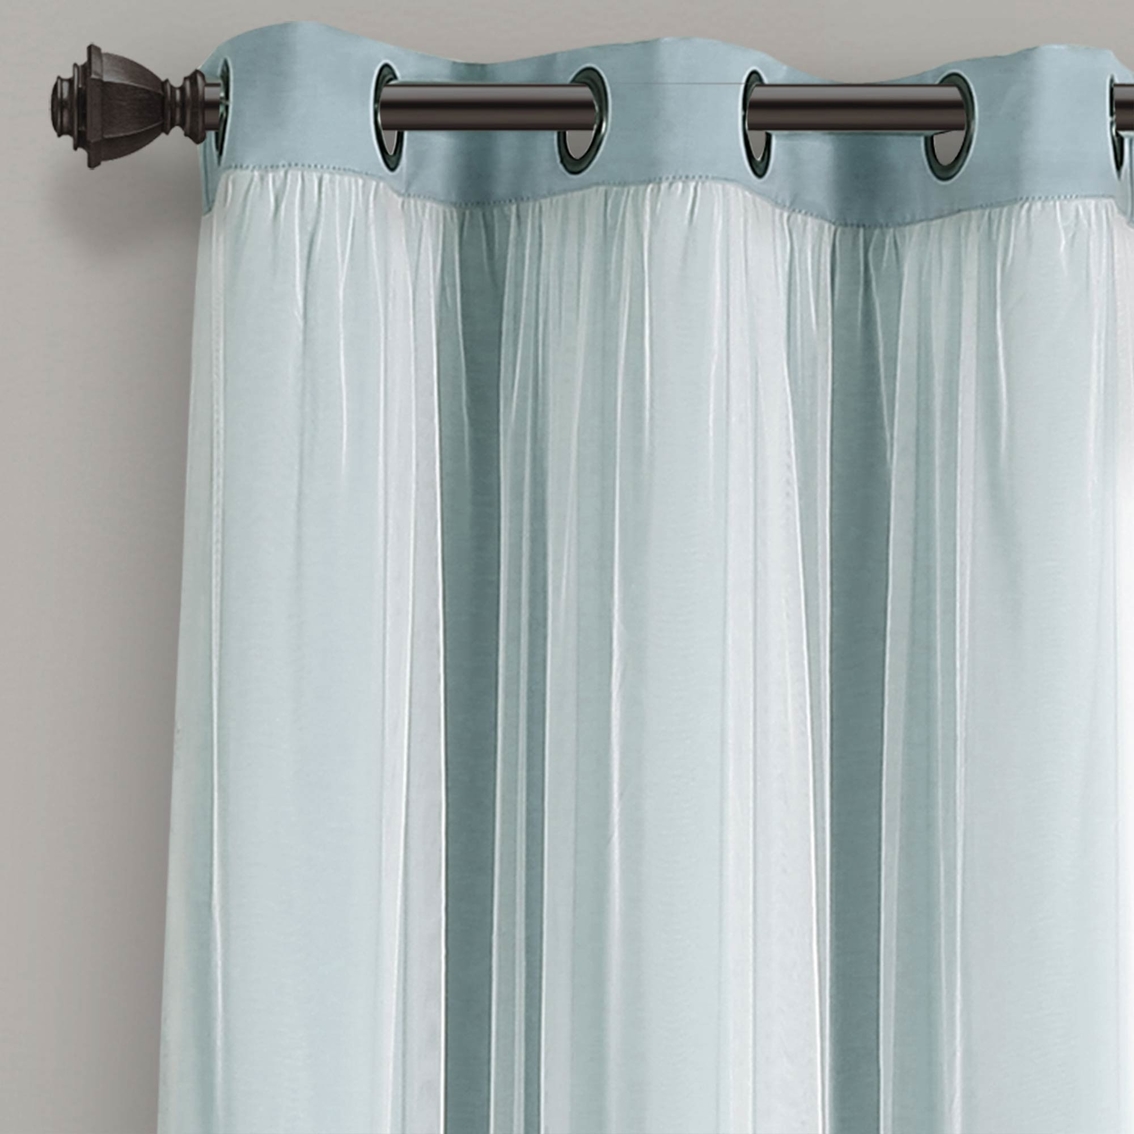 Lush Decor Grommet Sheer Panels with Insulated Blackout Lining 2 pk. Curtains Set - Image 3 of 4